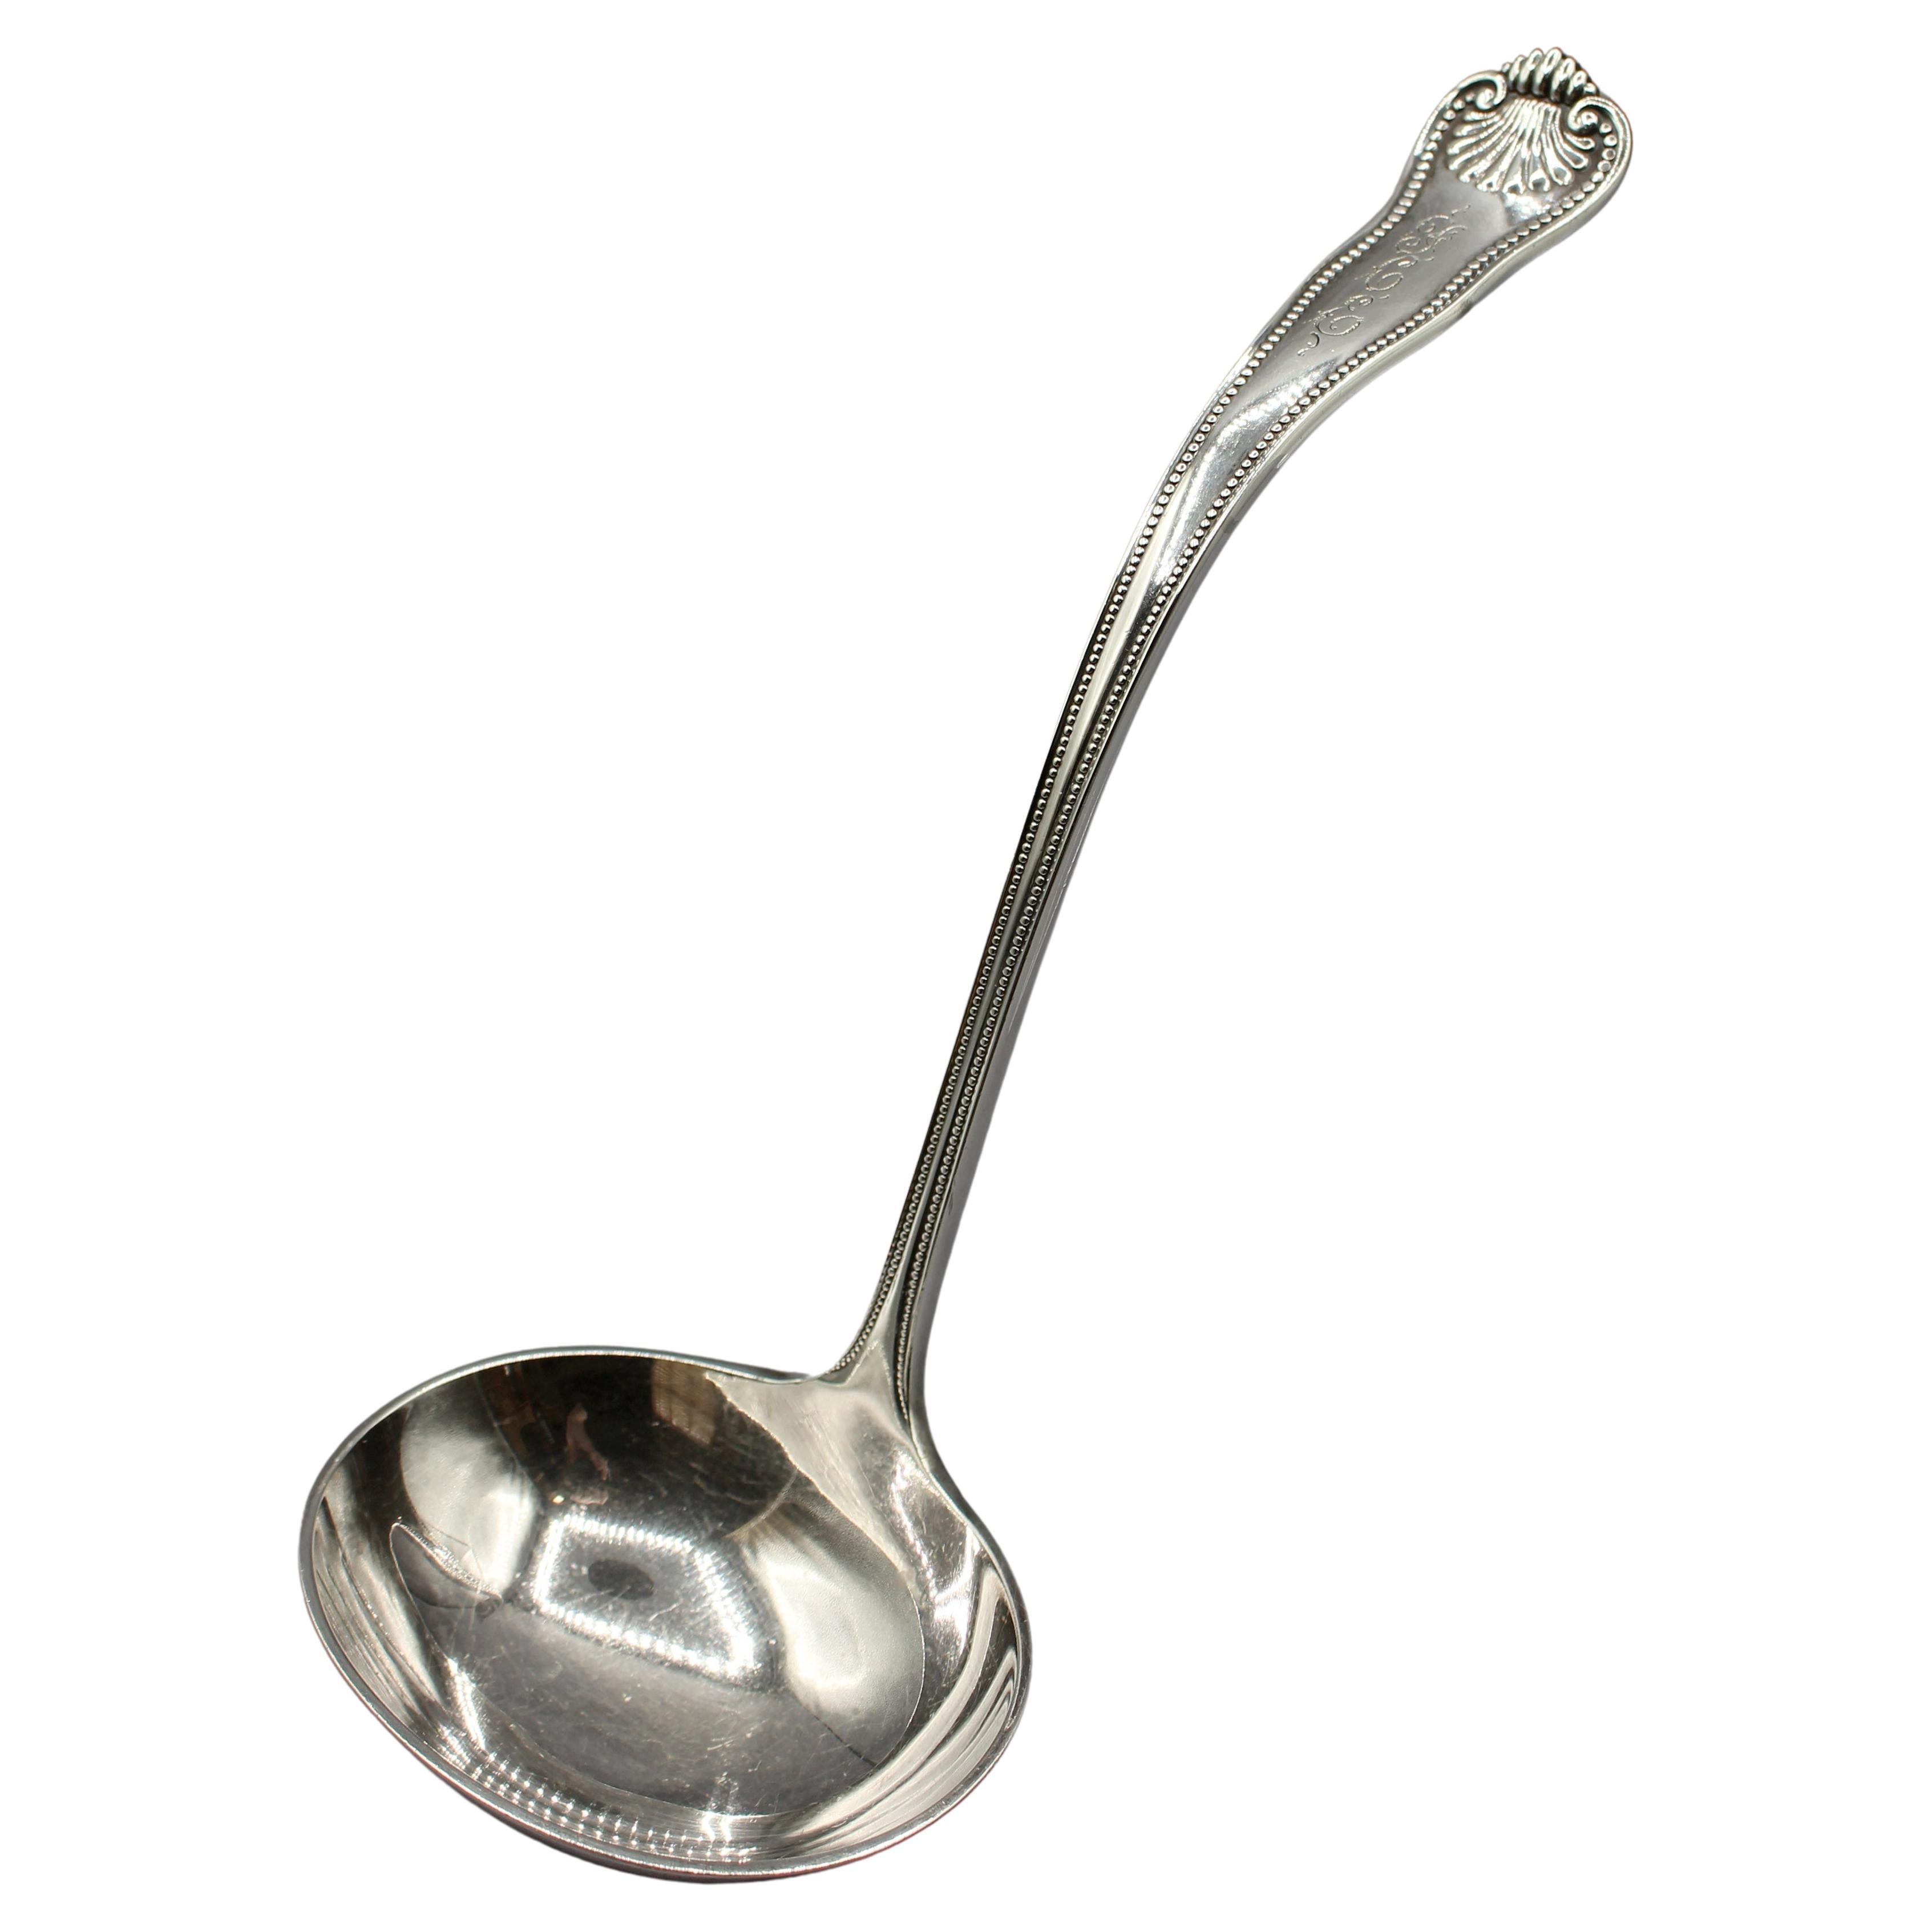 Sterling Silver Soup Ladle by Frank Smith in 1910